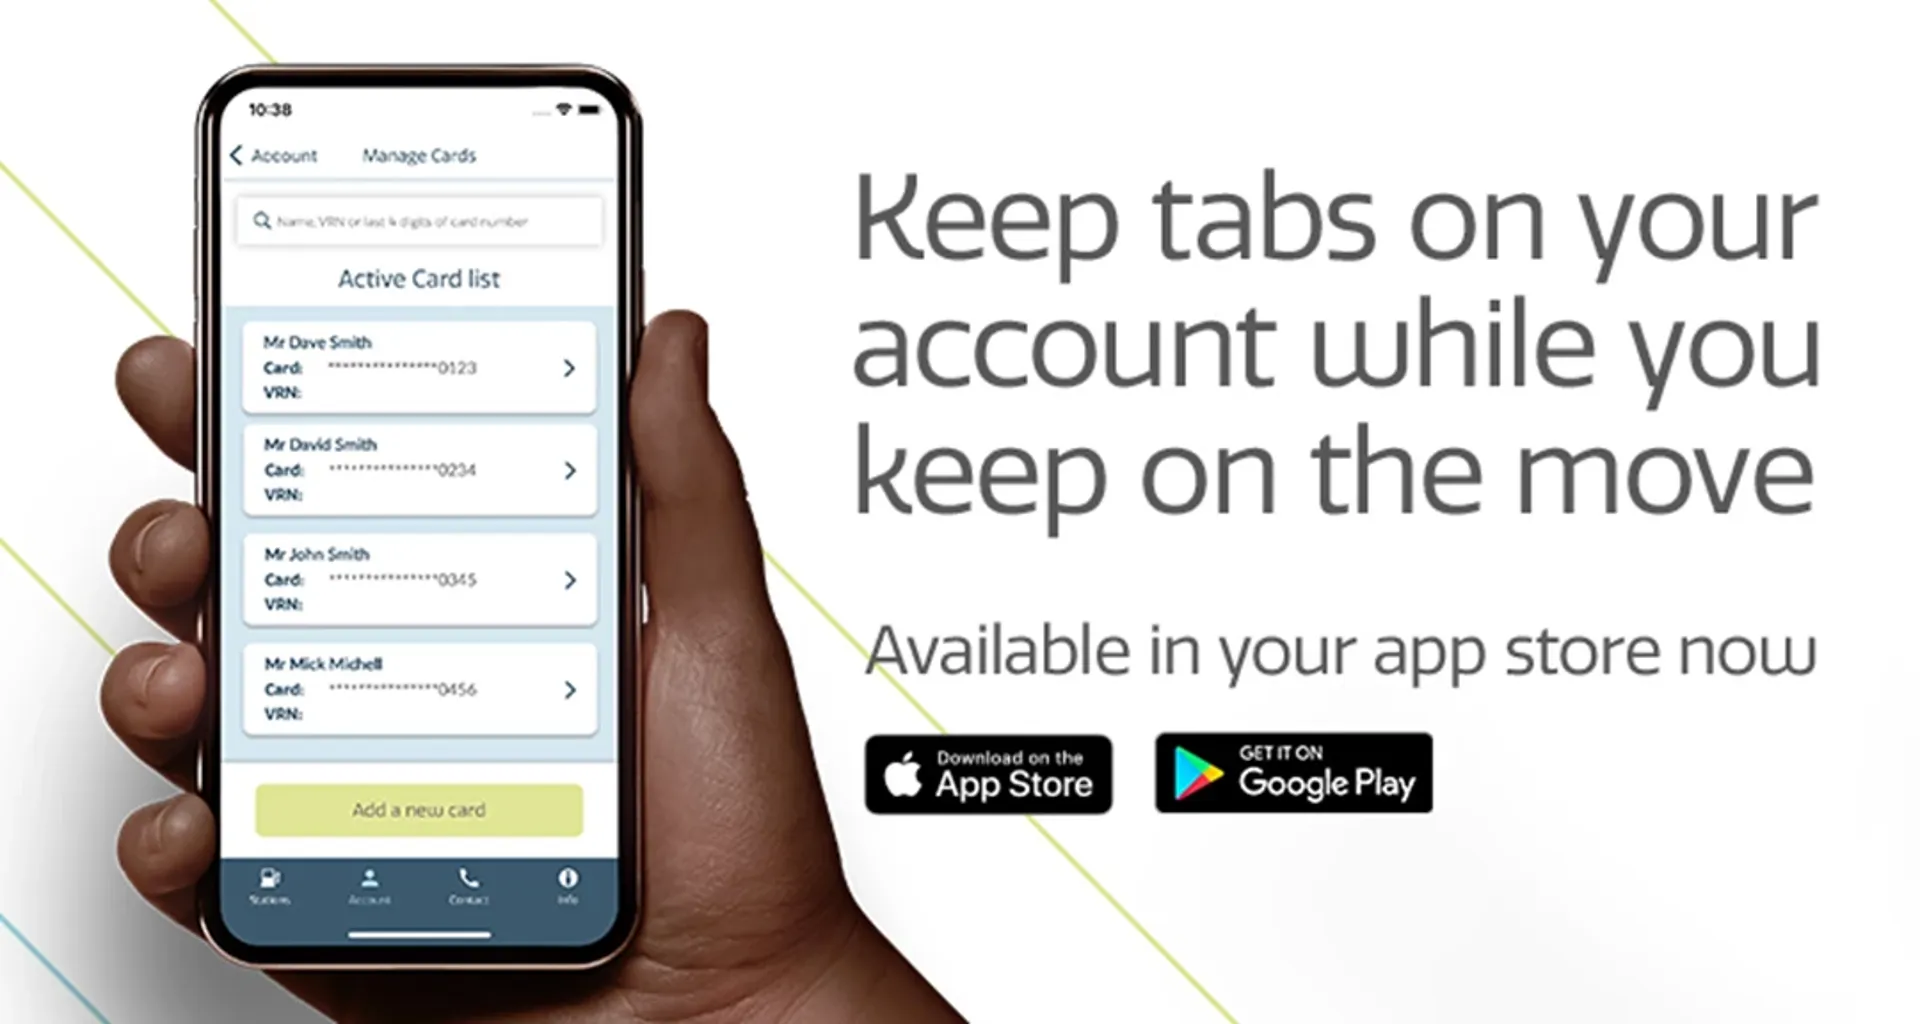 Keep tabs on your account while you keep on the move, available in your app store now